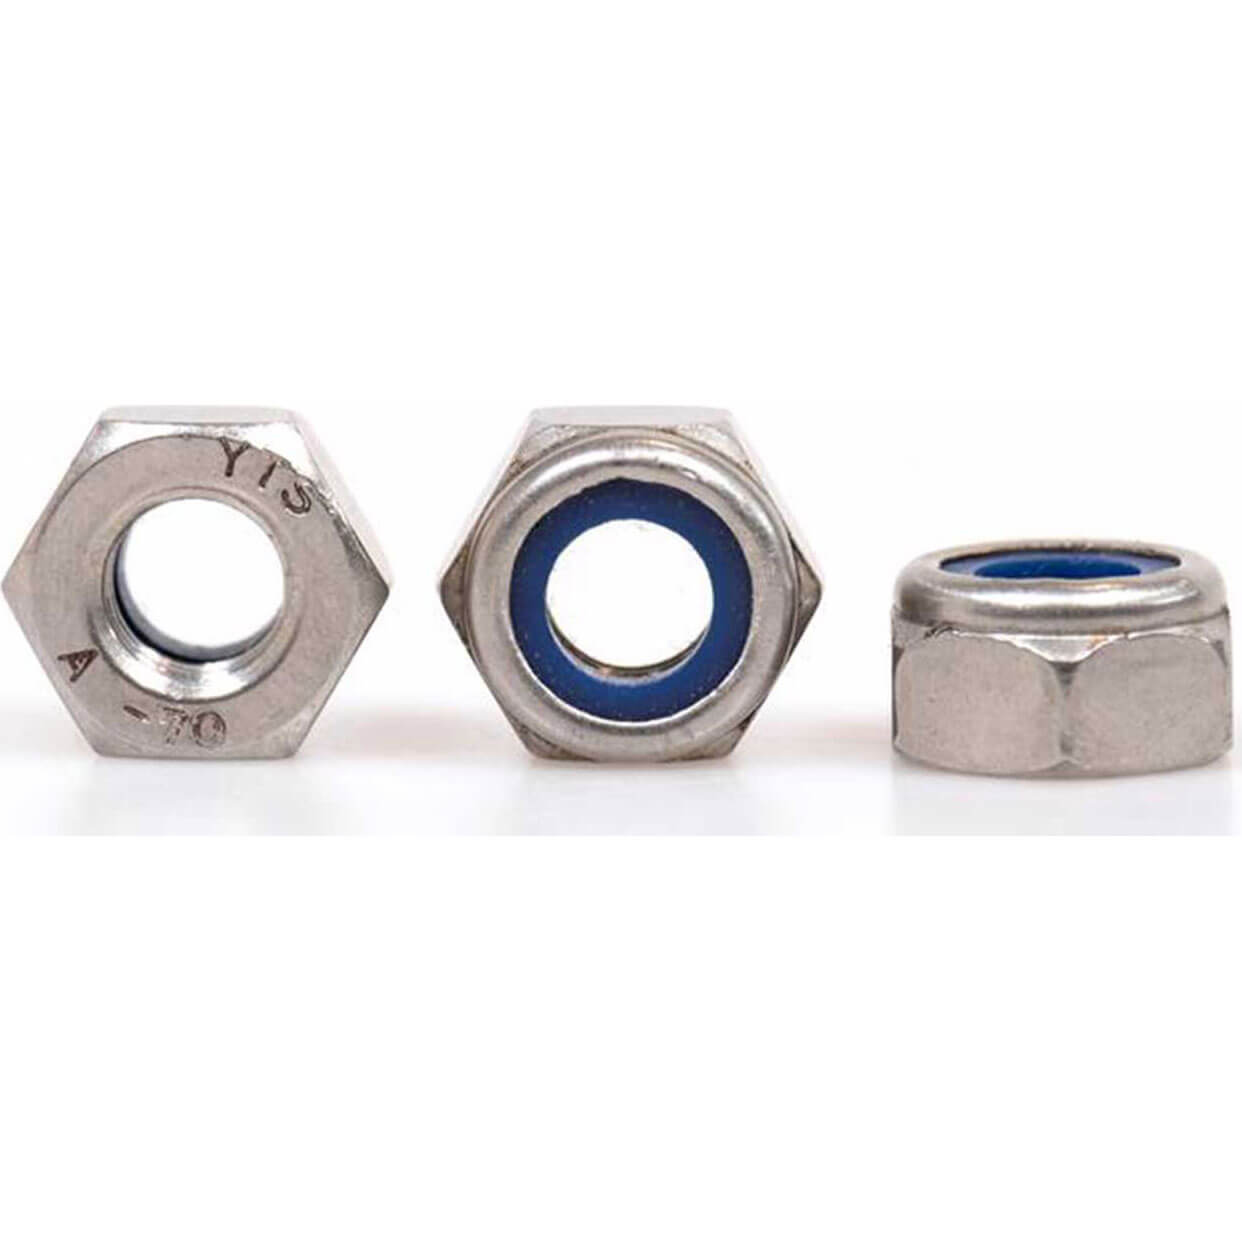 Image of Sirius A4 316 Stainless Steel Nyloc Nuts M16